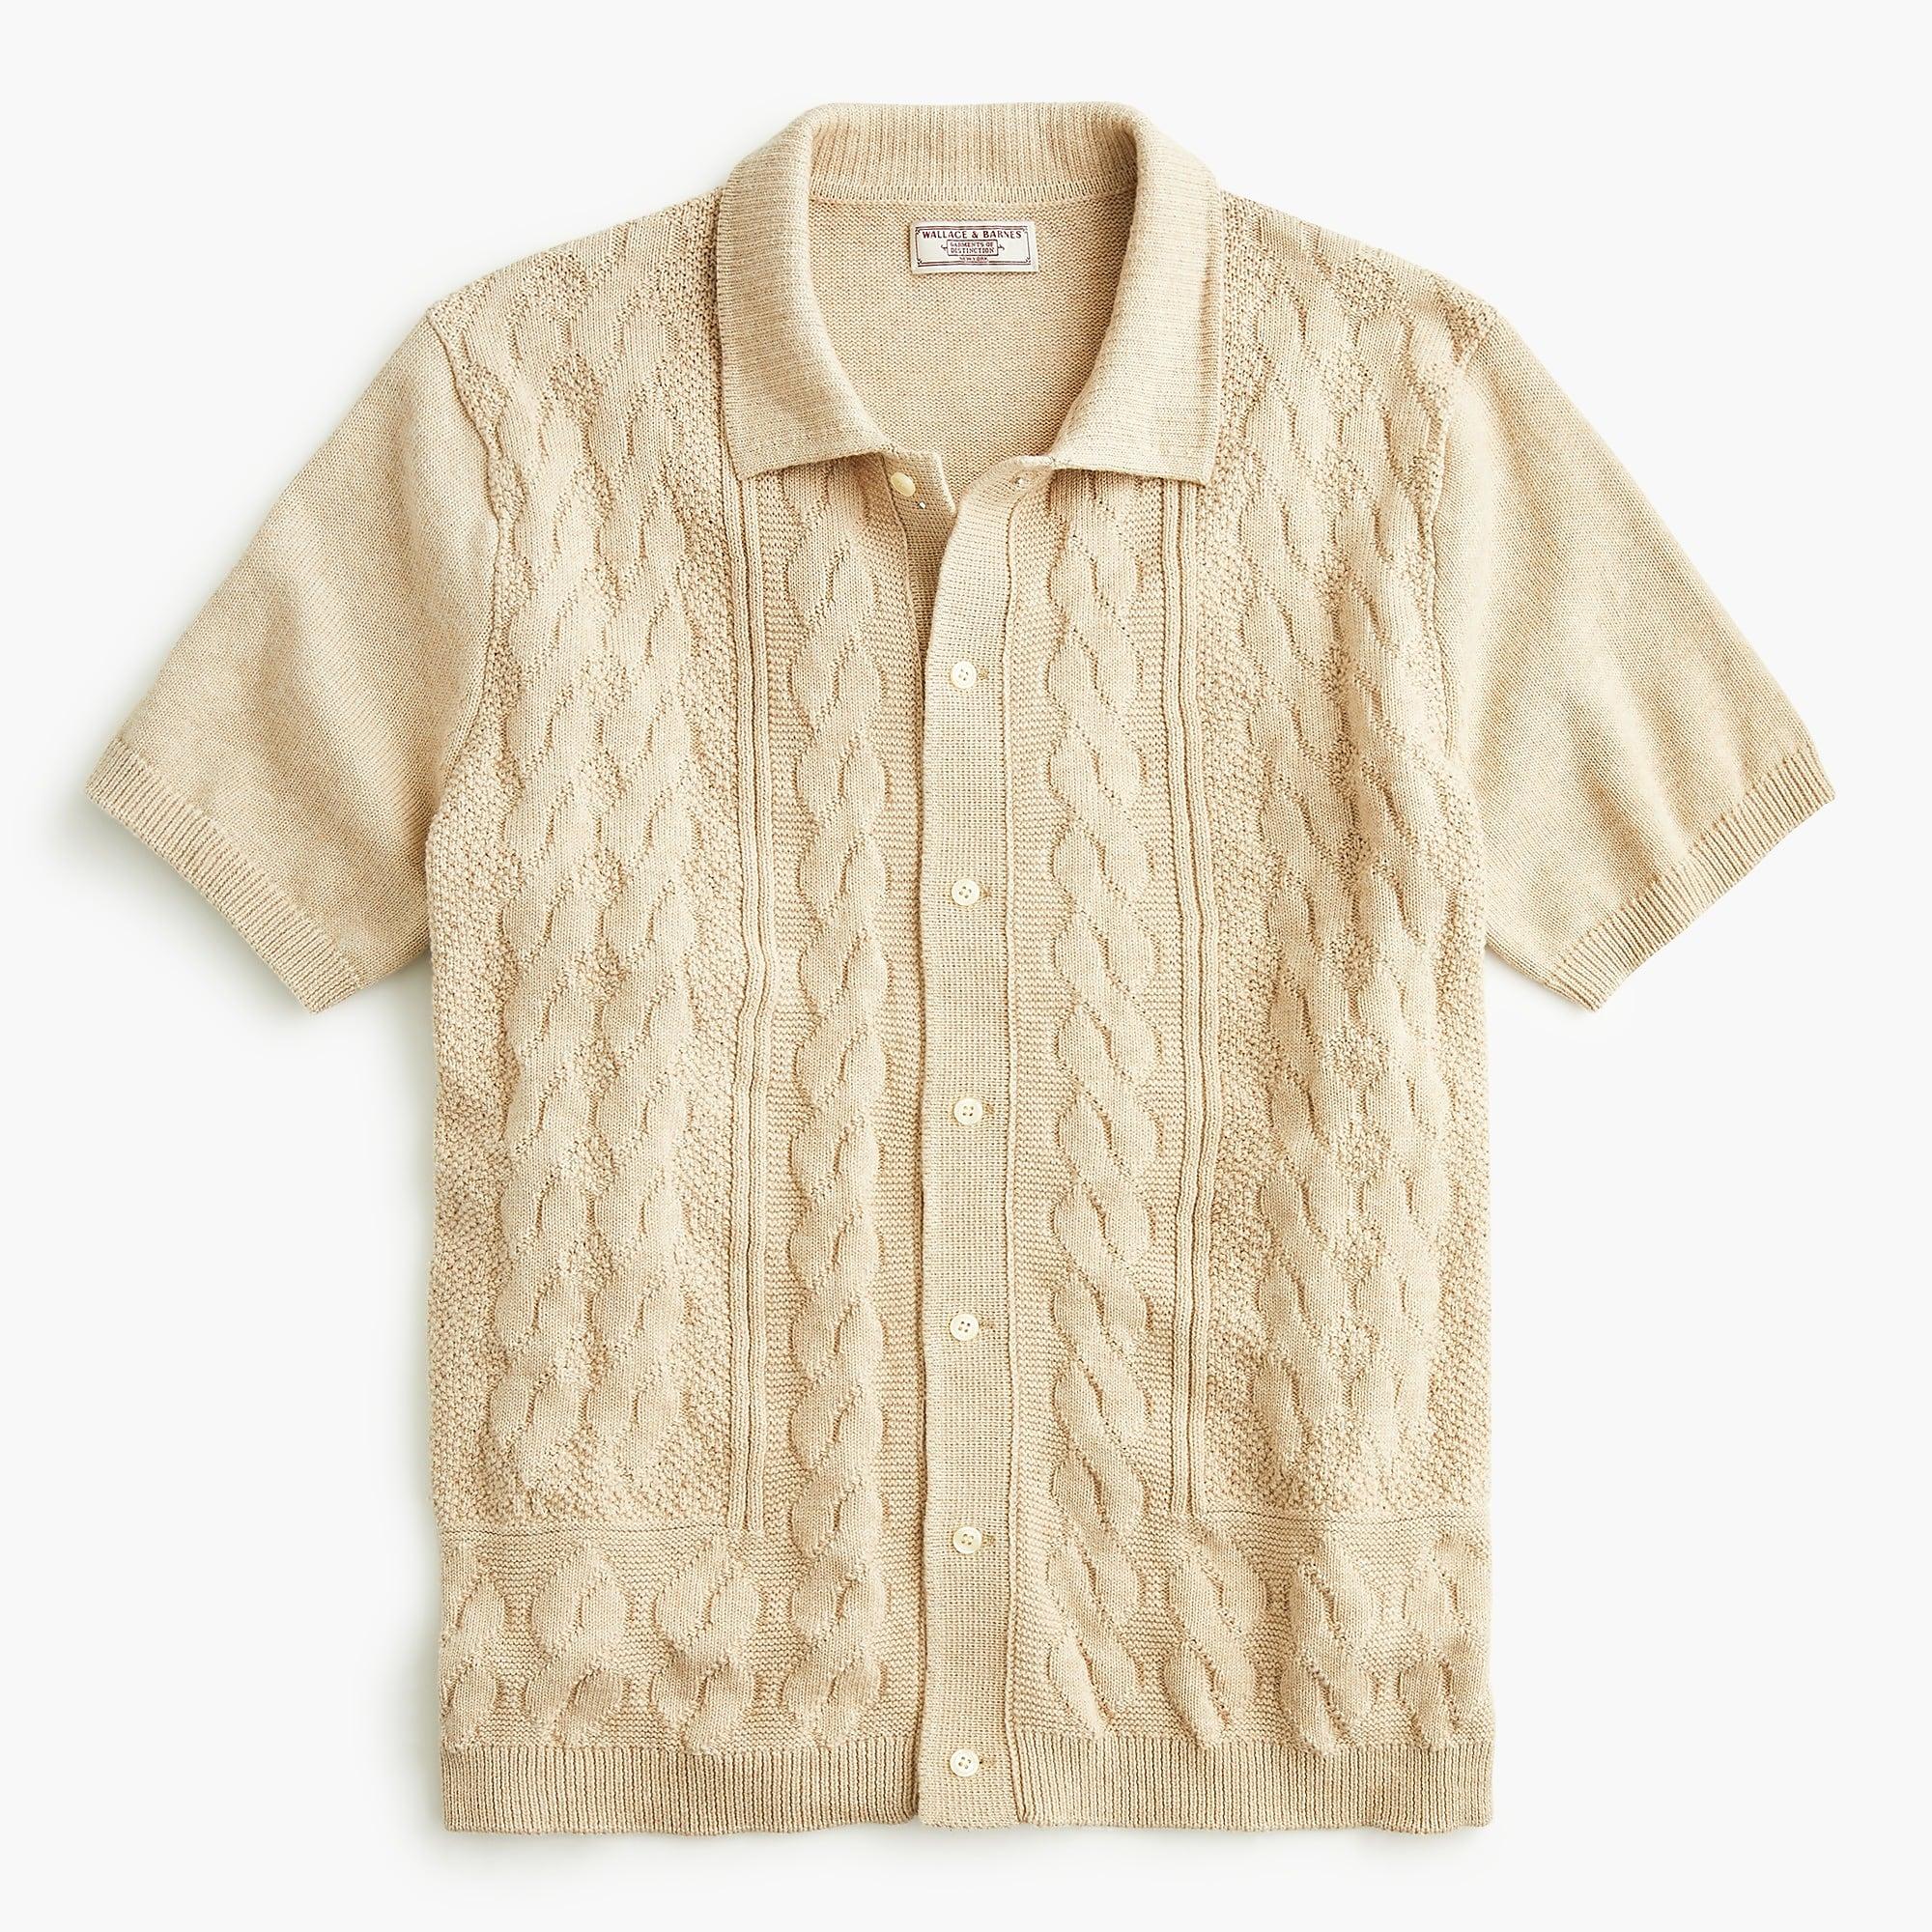 Lyst - J.Crew Wallace & Barnes Cotton Cable-knit Short-sleeve Polo